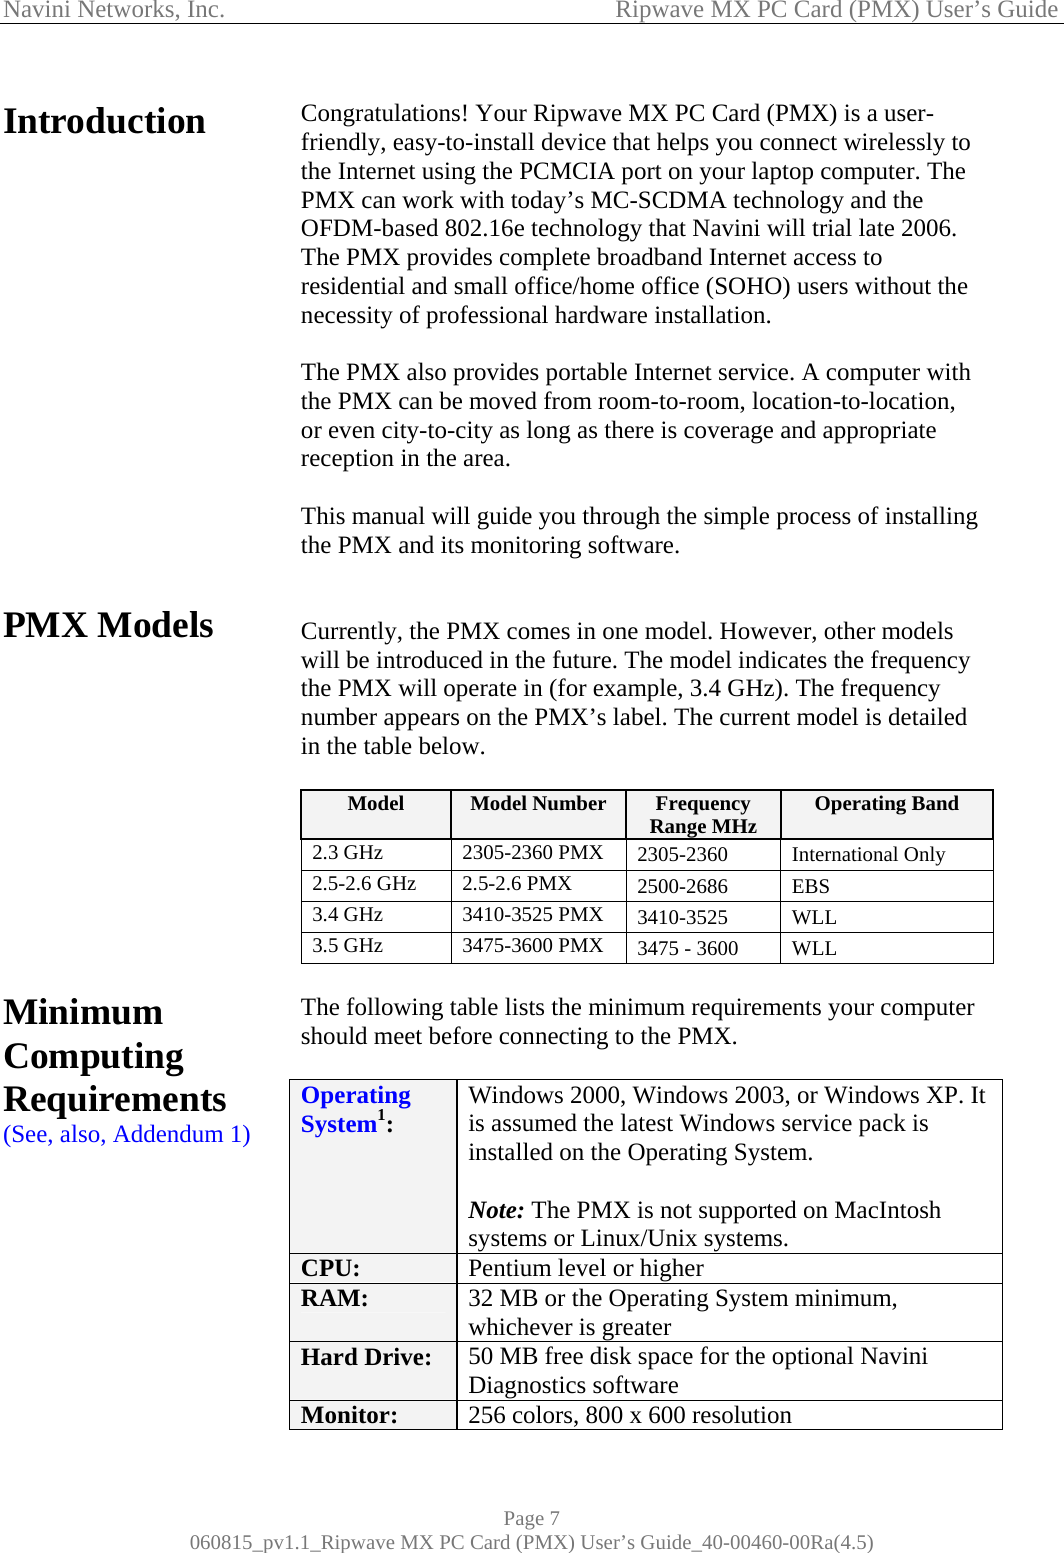 Navini Networks, Inc.                                           Ripwave MX PC Card (PMX) User’s Guide Introduction                 PMX Models             Minimum Computing Requirements (See, also, Addendum 1)           Congratulations! Your Ripwave MX PC Card (PMX) is a user-friendly, easy-to-install device that helps you connect wirelessly to the Internet using the PCMCIA port on your laptop computer. The PMX can work with today’s MC-SCDMA technology and the OFDM-based 802.16e technology that Navini will trial late 2006. The PMX provides complete broadband Internet access to residential and small office/home office (SOHO) users without the necessity of professional hardware installation.   The PMX also provides portable Internet service. A computer with the PMX can be moved from room-to-room, location-to-location, or even city-to-city as long as there is coverage and appropriate reception in the area.  This manual will guide you through the simple process of installing the PMX and its monitoring software.   Currently, the PMX comes in one model. However, other models will be introduced in the future. The model indicates the frequency the PMX will operate in (for example, 3.4 GHz). The frequency number appears on the PMX’s label. The current model is detailed in the table below.  Model  Model Number  Frequency Range MHz  Operating Band 2.3 GHz  2305-2360 PMX  2305-2360 International Only 2.5-2.6 GHz  2.5-2.6 PMX  2500-2686 EBS 3.4 GHz  3410-3525 PMX  3410-3525 WLL 3.5 GHz  3475-3600 PMX  3475 - 3600  WLL  The following table lists the minimum requirements your computer should meet before connecting to the PMX.  Operating System1:  Windows 2000, Windows 2003, or Windows XP. It is assumed the latest Windows service pack is installed on the Operating System.  Note: The PMX is not supported on MacIntosh systems or Linux/Unix systems. CPU:  Pentium level or higher RAM:  32 MB or the Operating System minimum, whichever is greater Hard Drive:  50 MB free disk space for the optional Navini Diagnostics software Monitor:  256 colors, 800 x 600 resolution Page 7 060815_pv1.1_Ripwave MX PC Card (PMX) User’s Guide_40-00460-00Ra(4.5) 